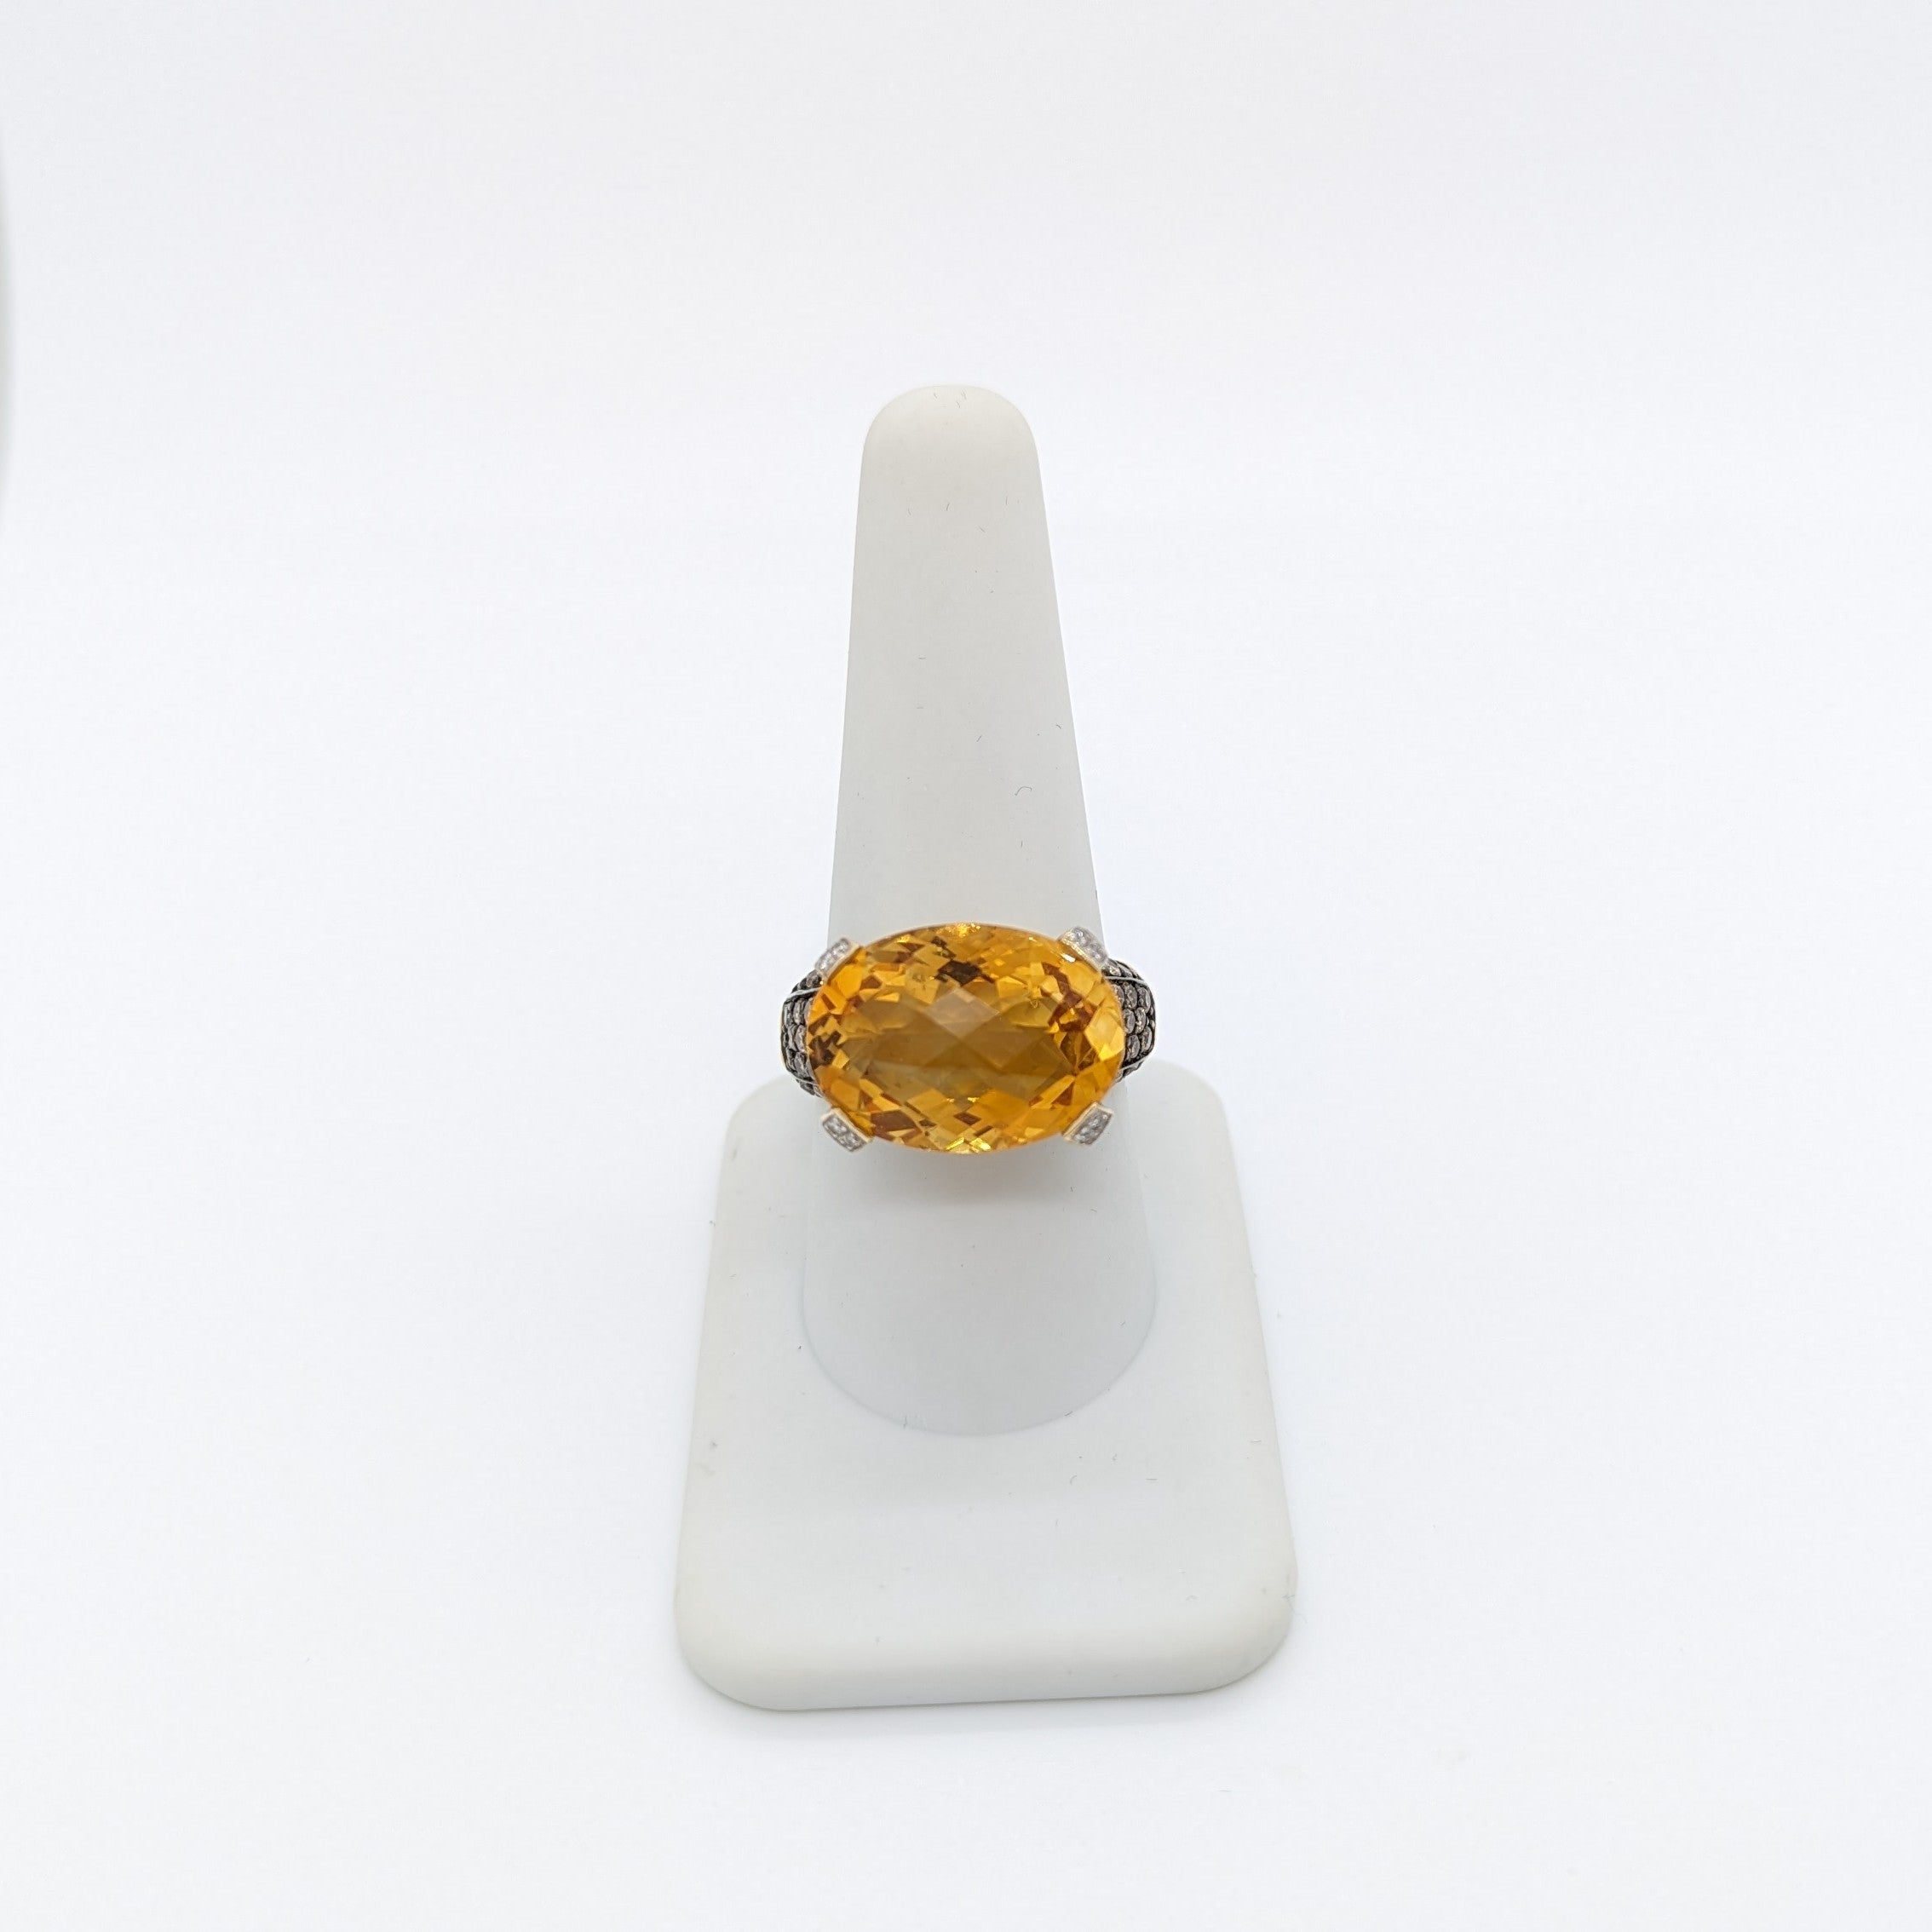 Gorgeous estate Levian cocktail ring with a big citrine oval, champagne, and white diamond rounds.  Handmade in 14k yellow gold.  Ring size 9.25.